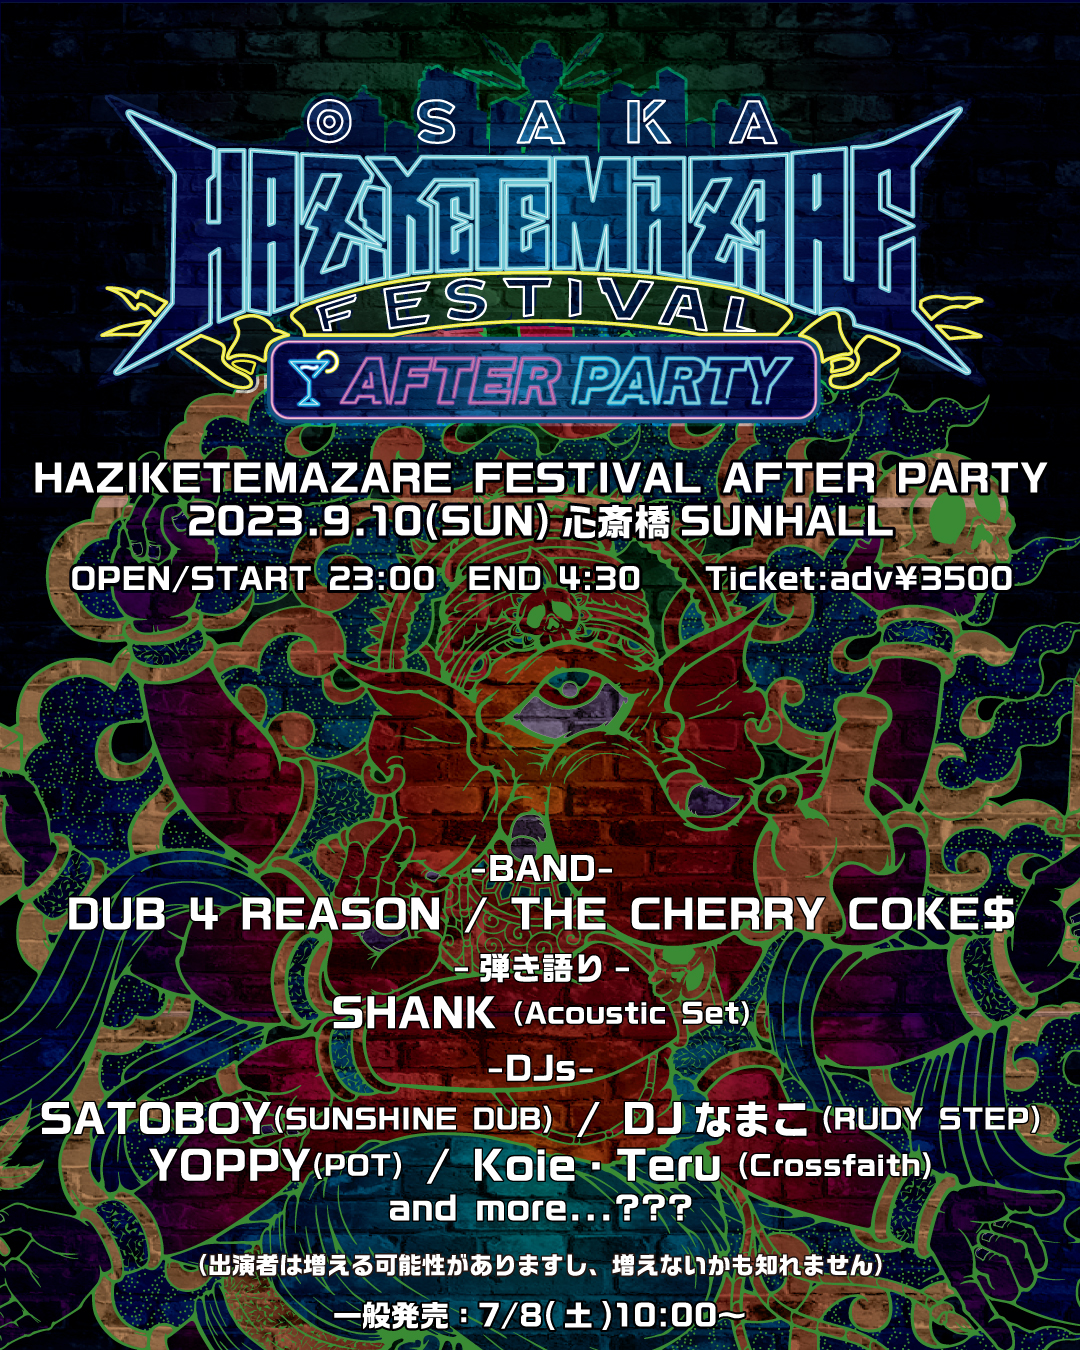 HAZIKETEMAZARE FESTIVAL 2023 AFTER PARTY